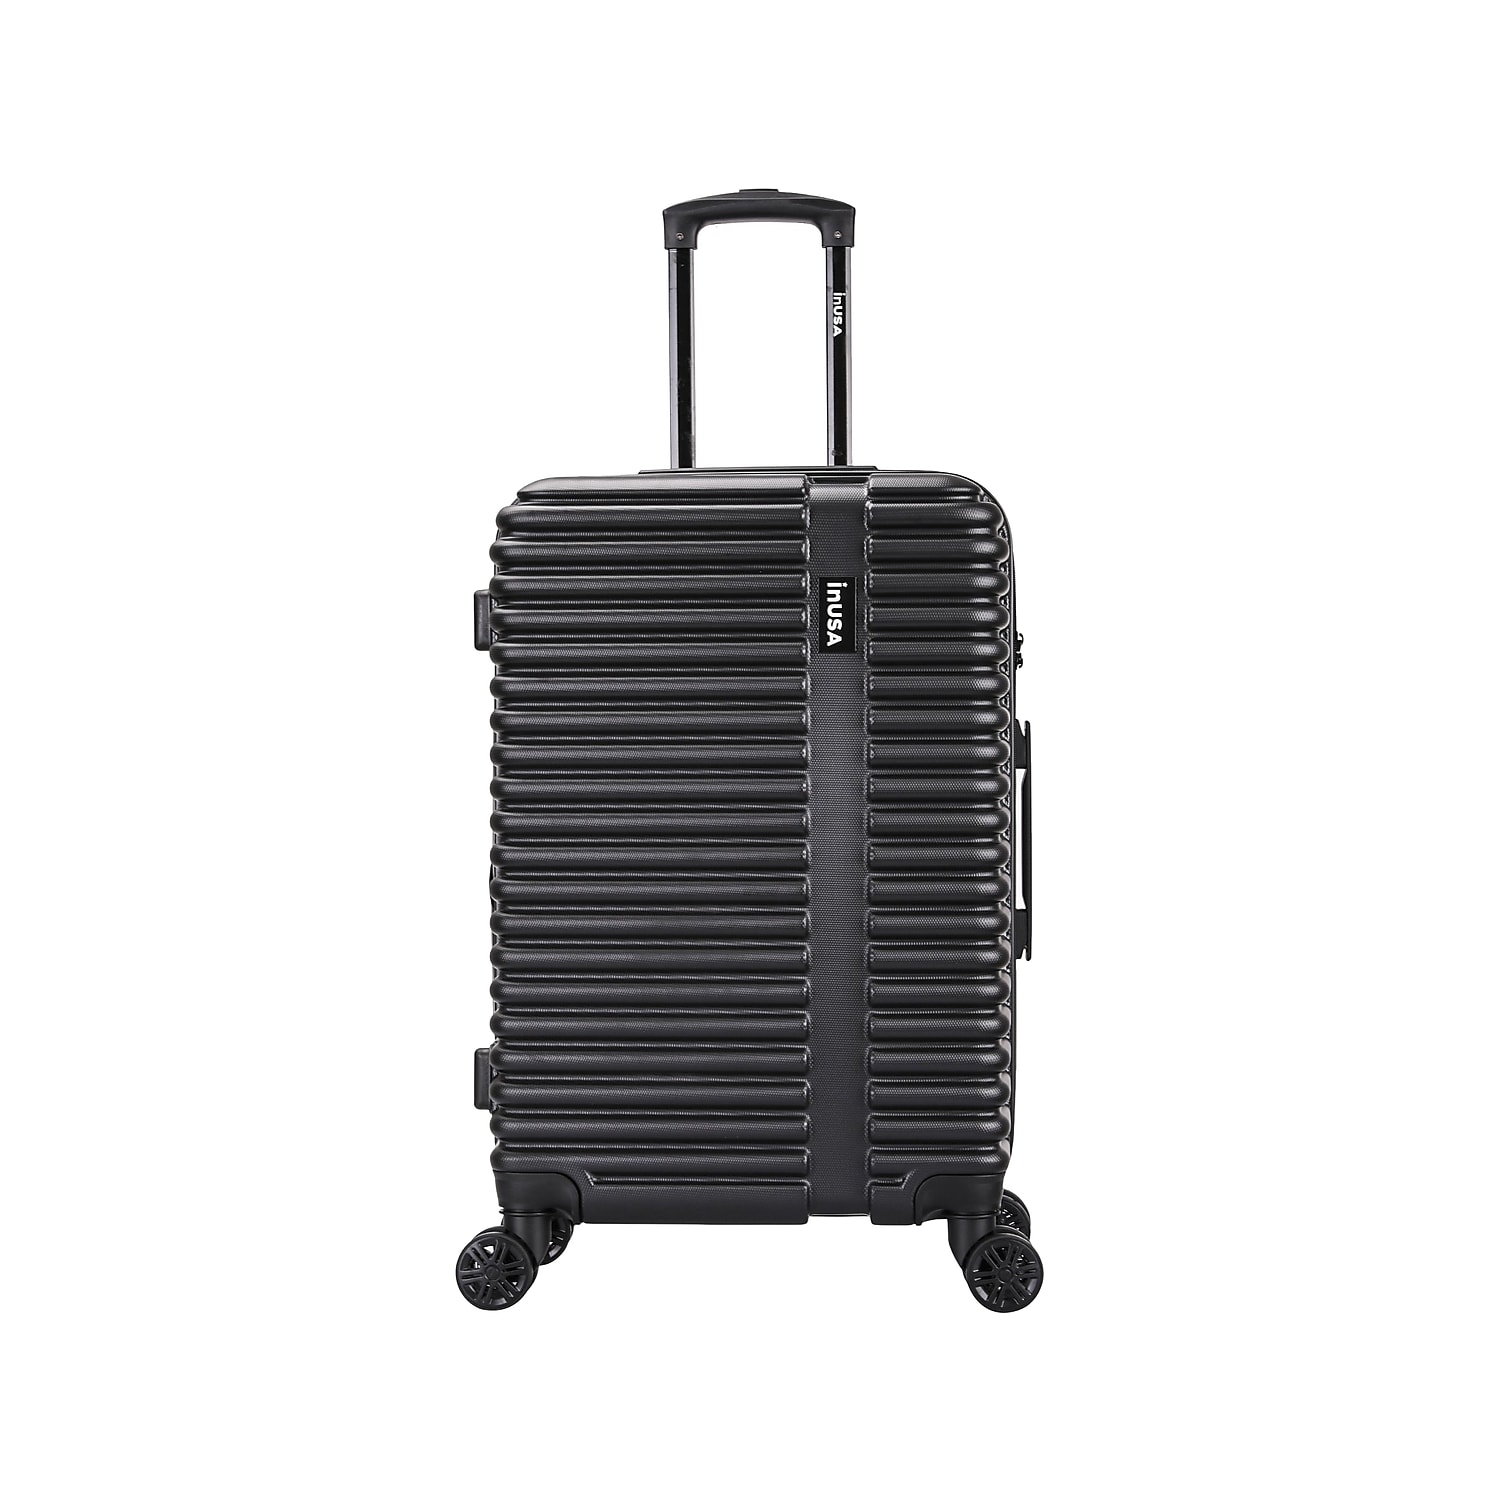 InUSA Ally 24" Hardside Lightweight Luggage with Spinner Wheels, Handle and Trolley, Black - image 3 of 9